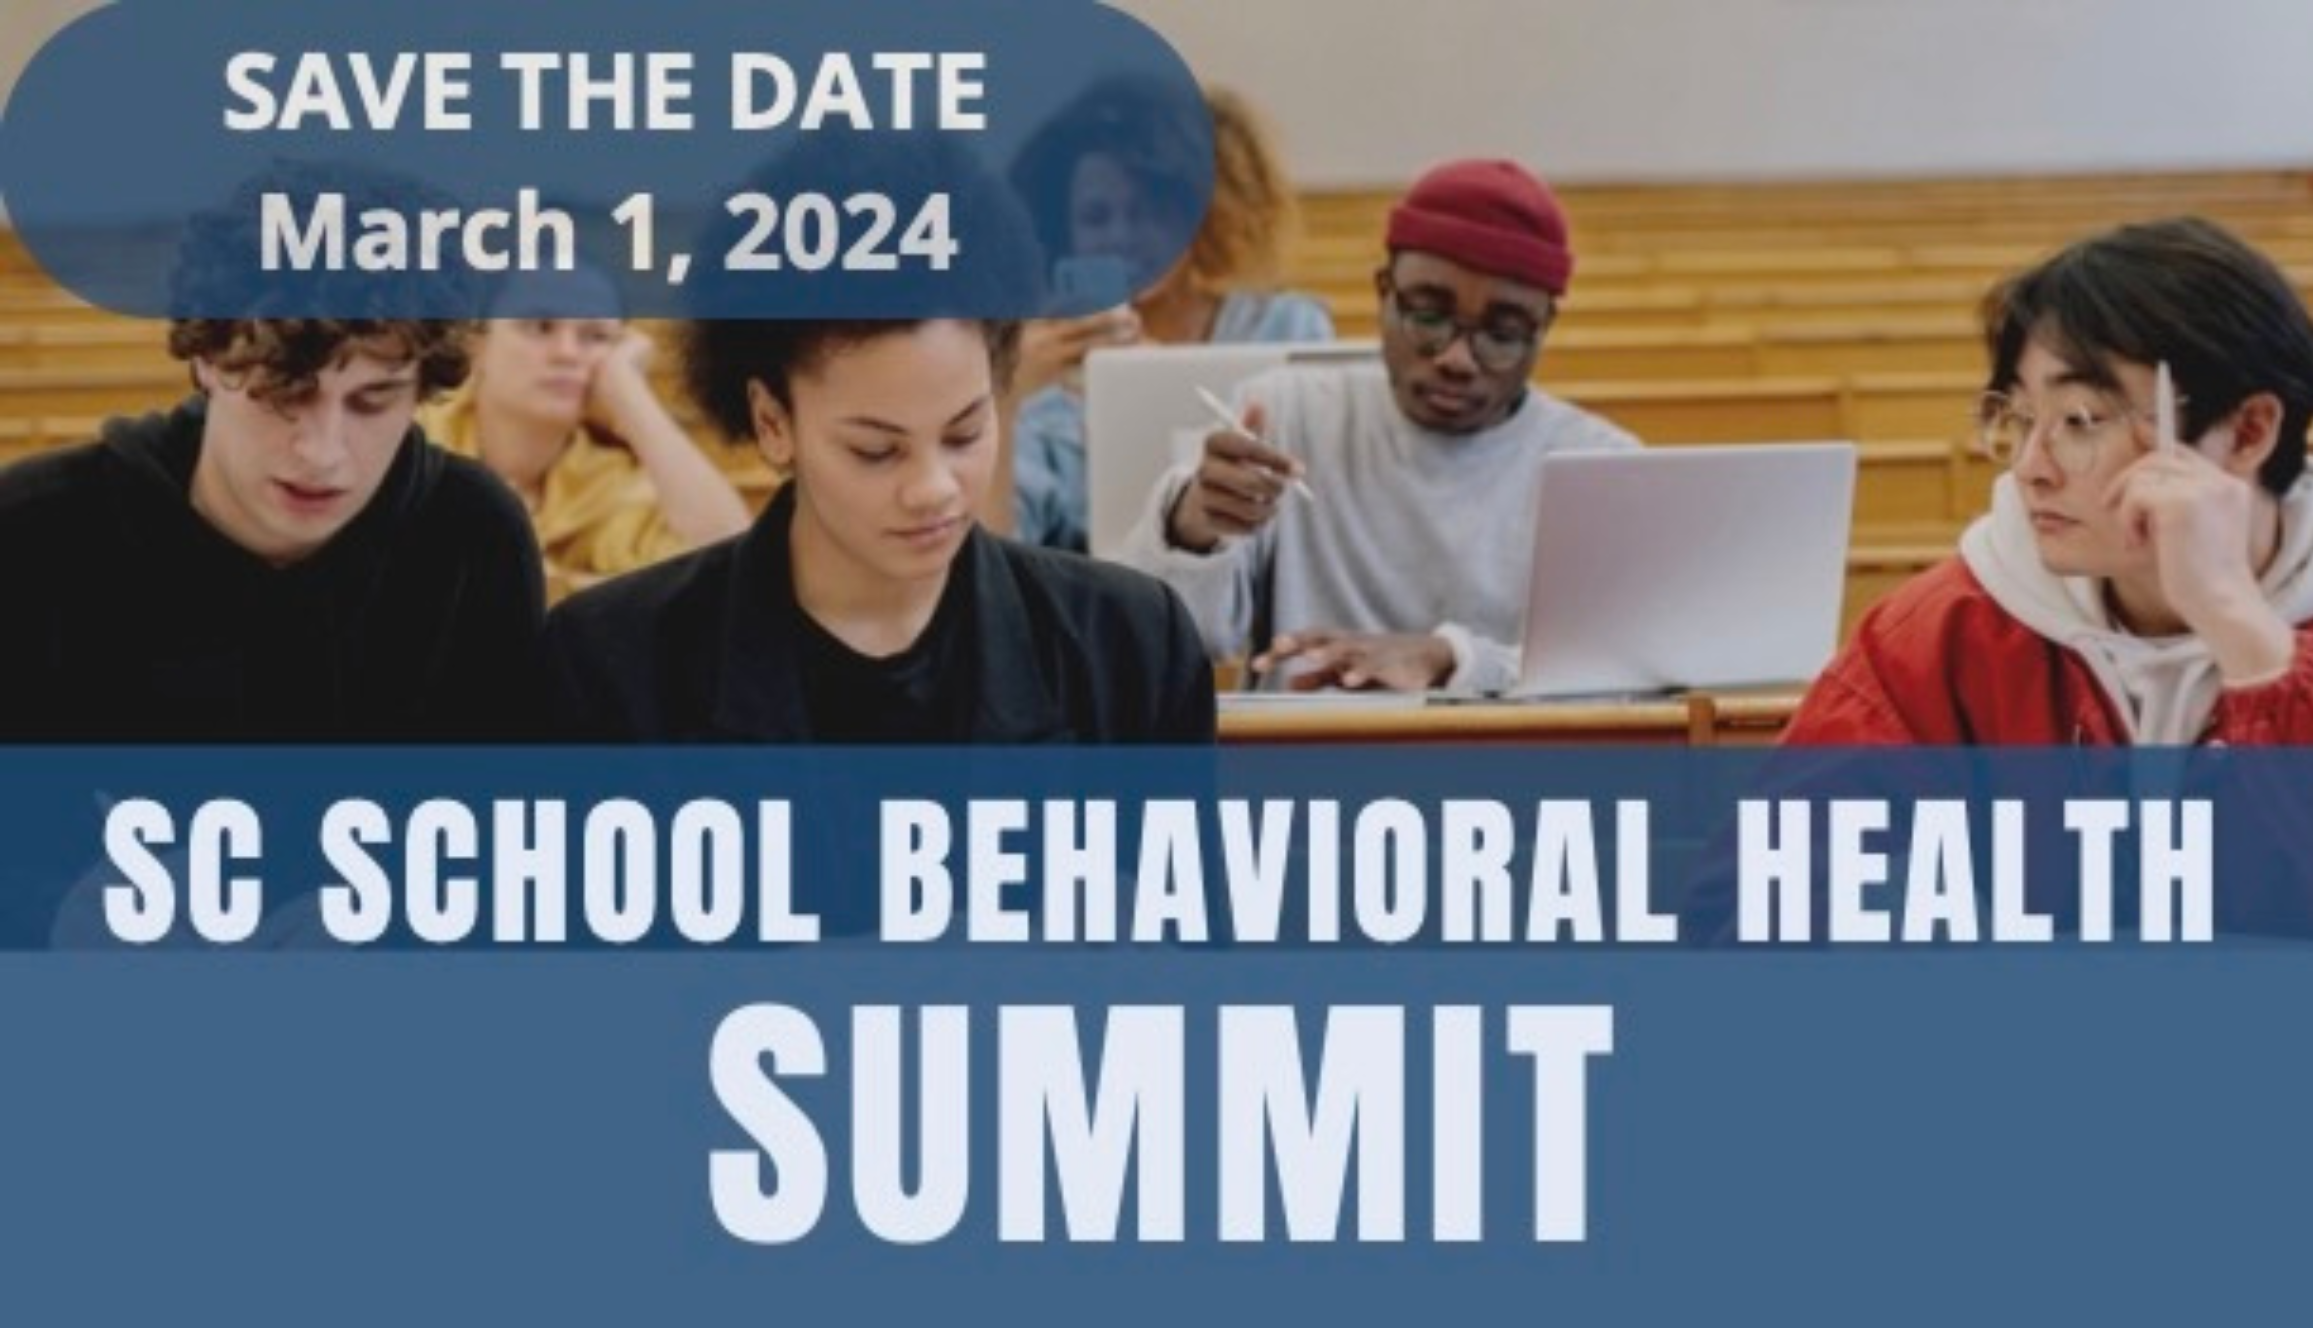 sc school beahavioral health summit - save the date march 1, 2024